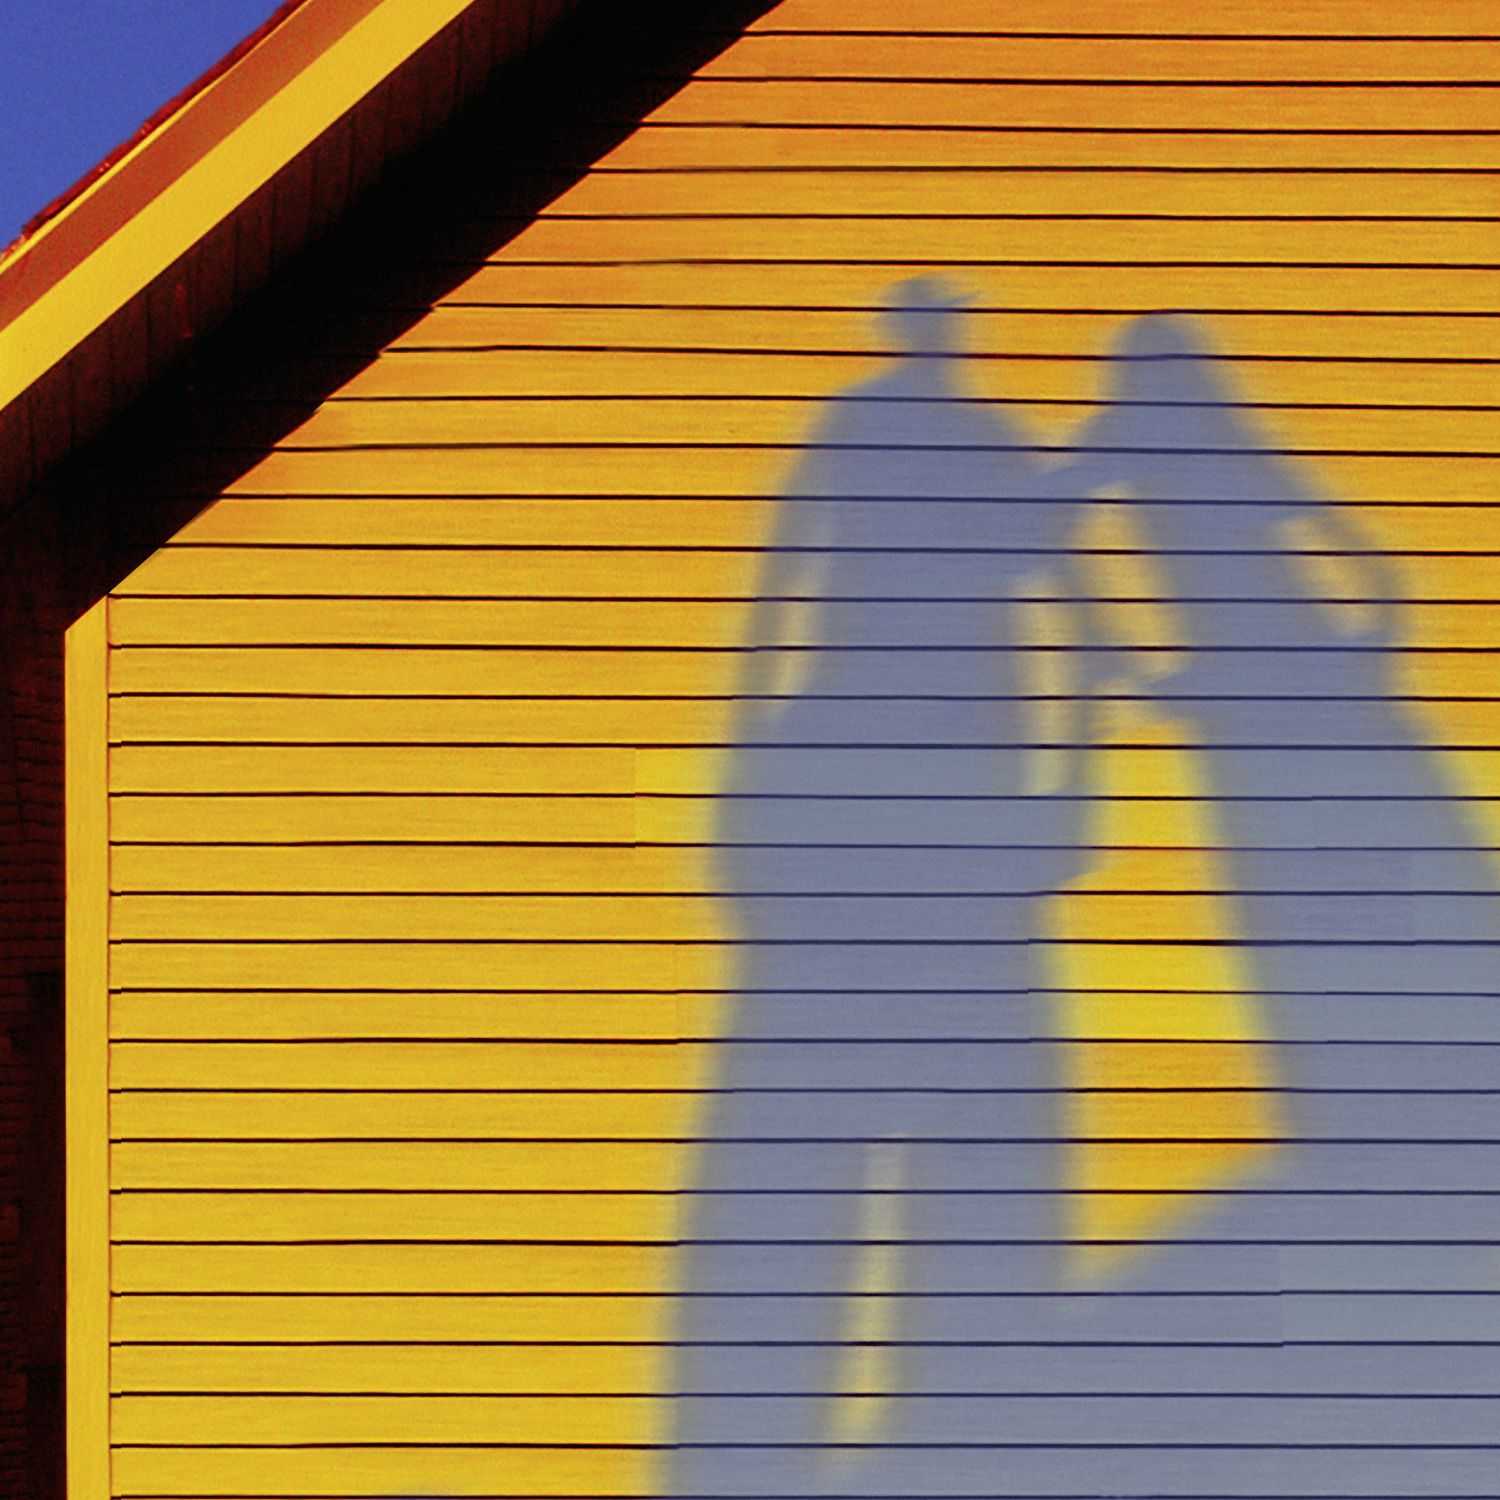 Shadows of two people on the clean yellow siding of a home with a bright blue sky in the background